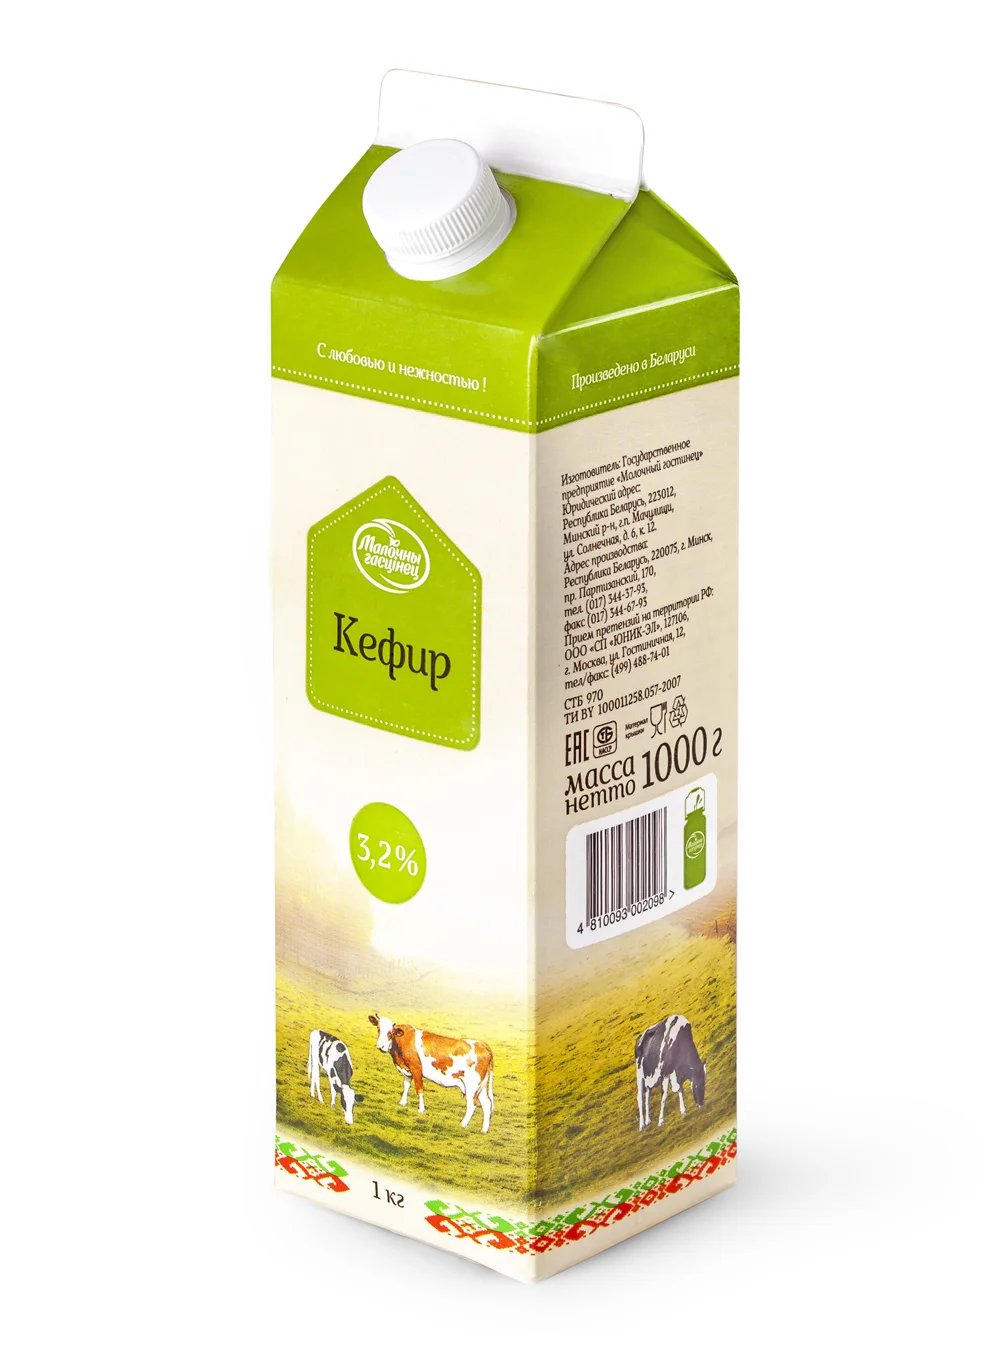 Kefir with a fat content of 3.2% Dairy hotel